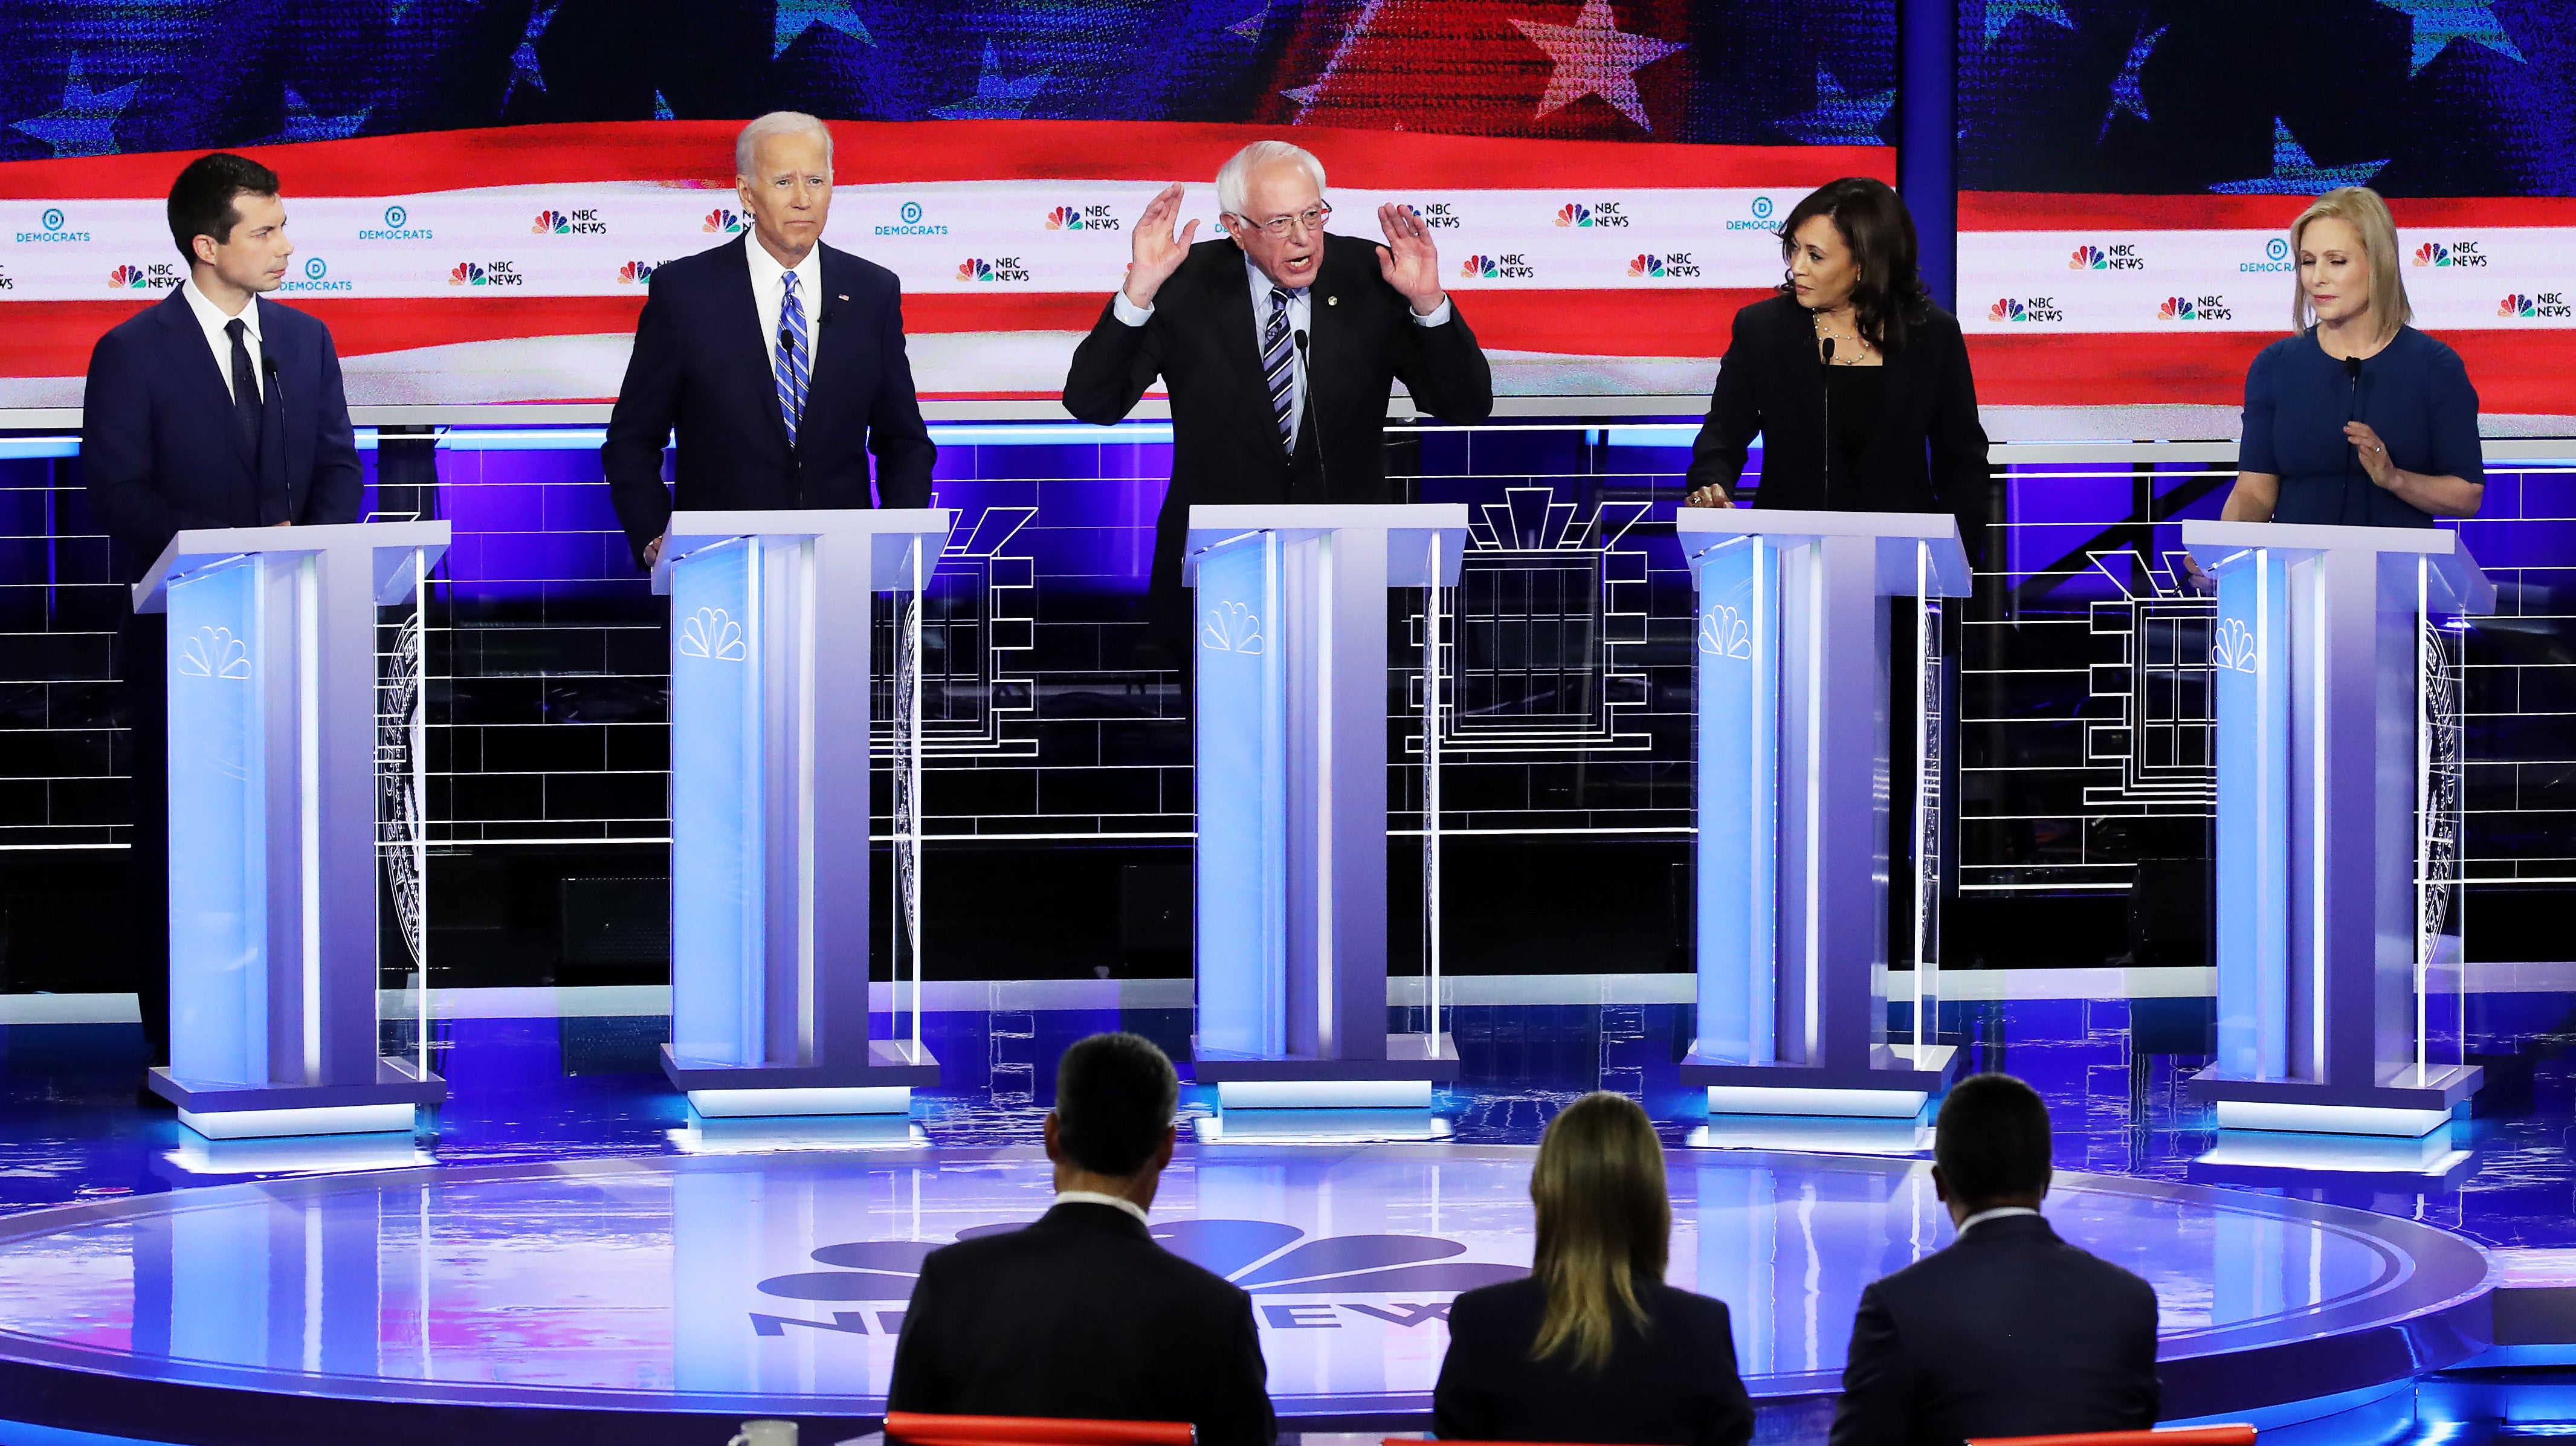 Here’s What You Missed On Day Two Of The U.S. Democratic Debates